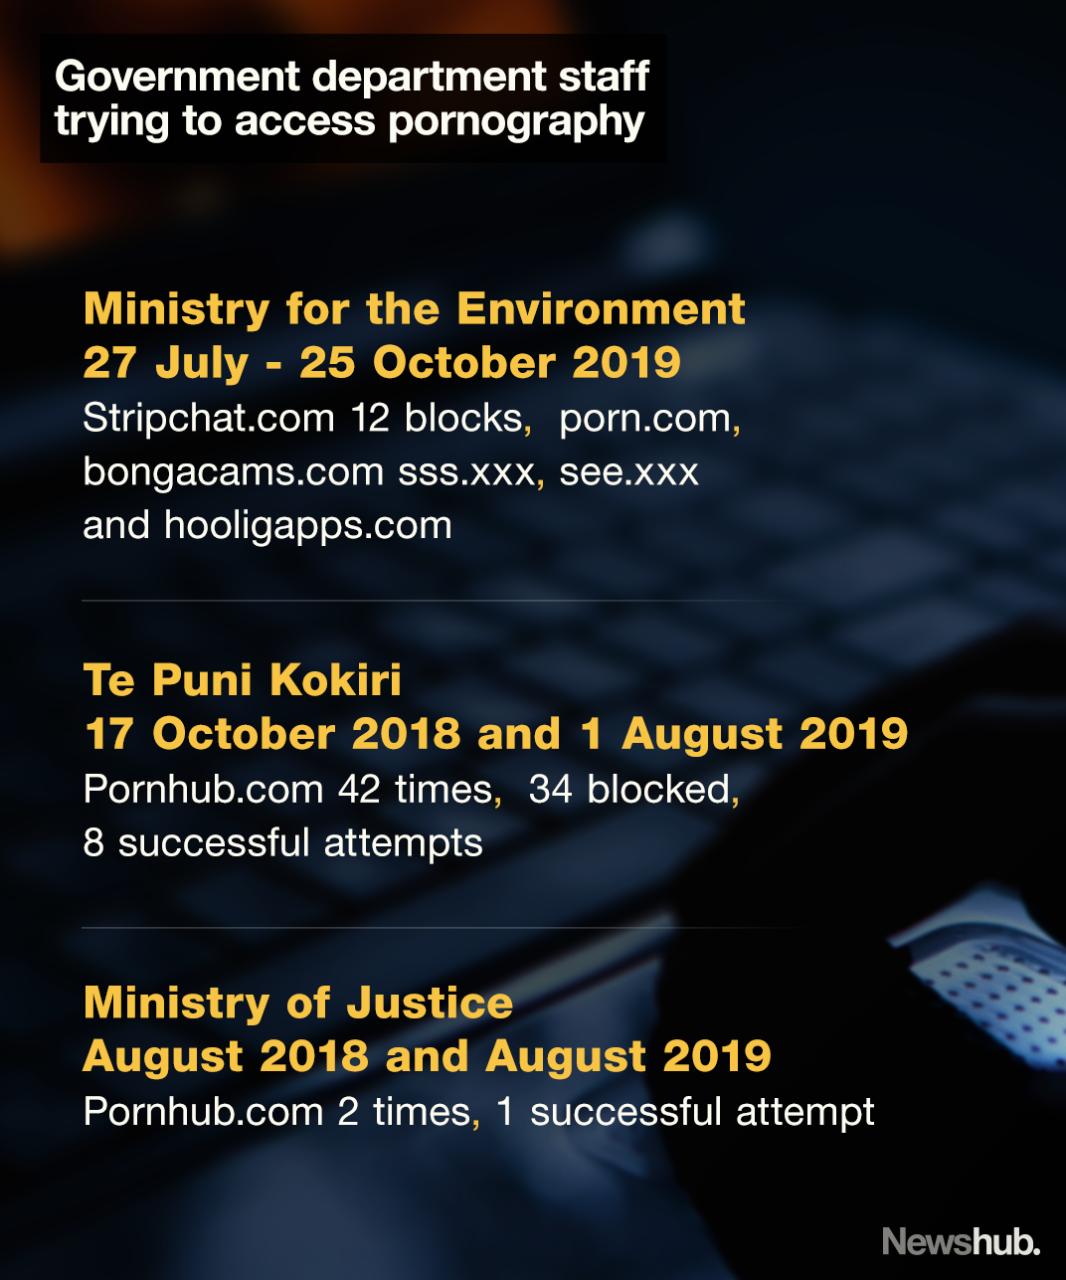 Porn storm: The Government departments clicking on illicit ...